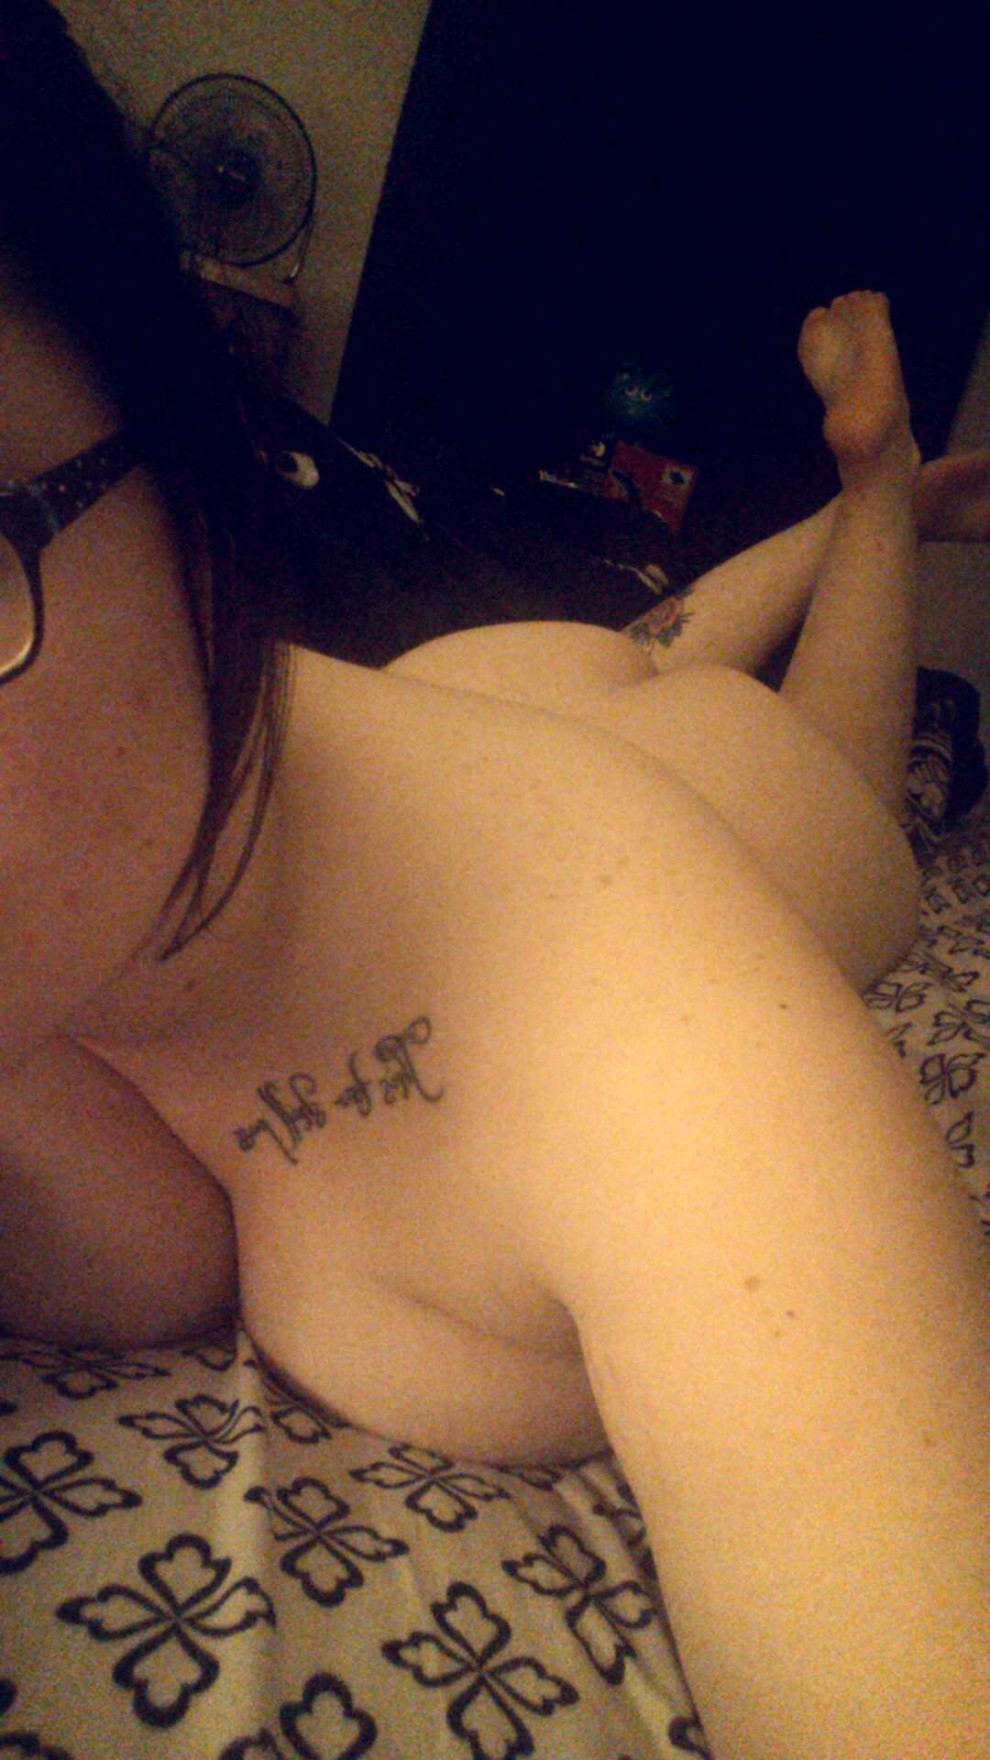 (F) i might beg you to stop and put up a fight